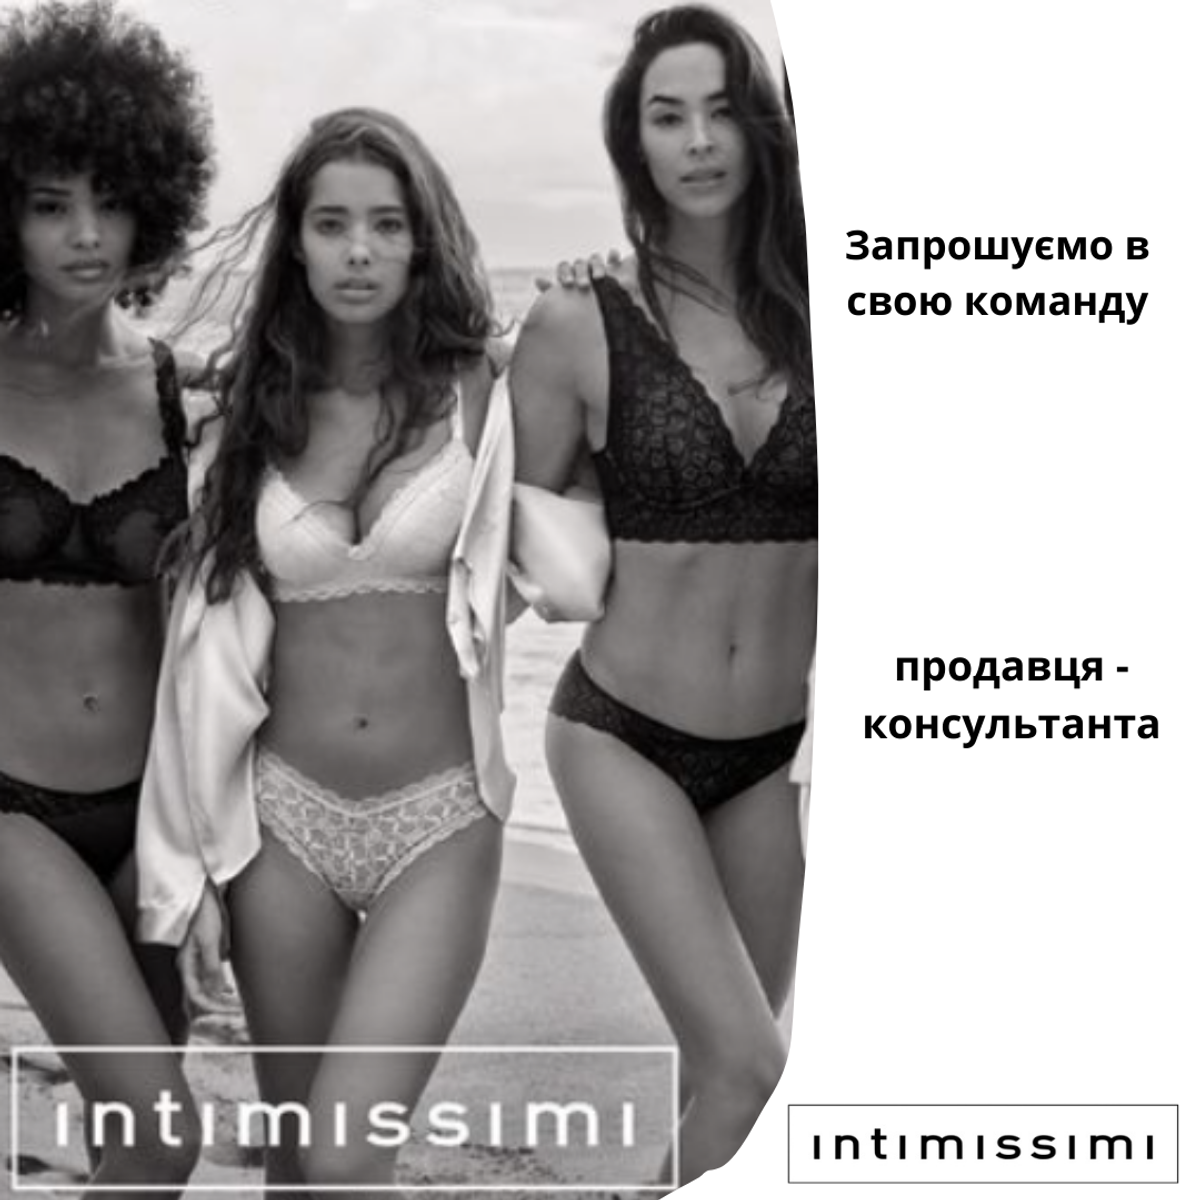 Vacancy at the INTIMISSIMI store